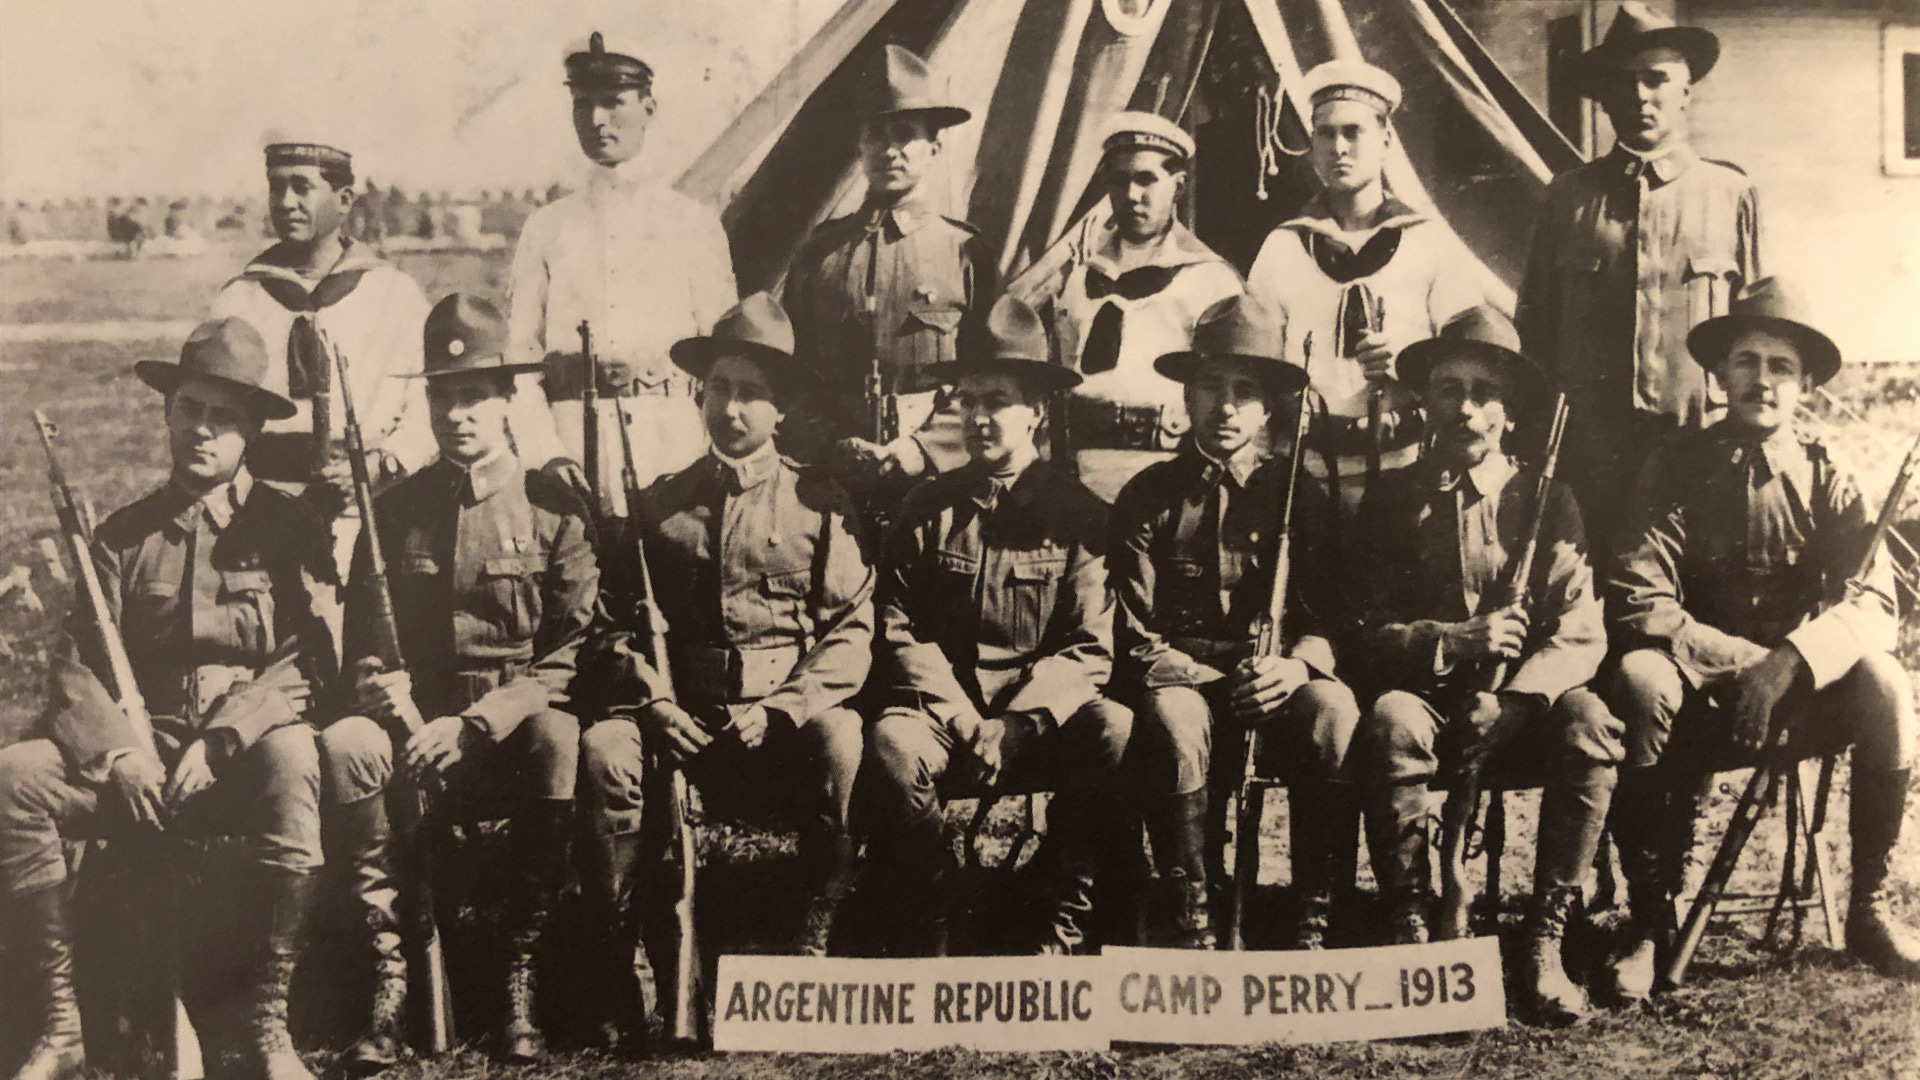 1913 Argentine Rifle Team at Camp Perry